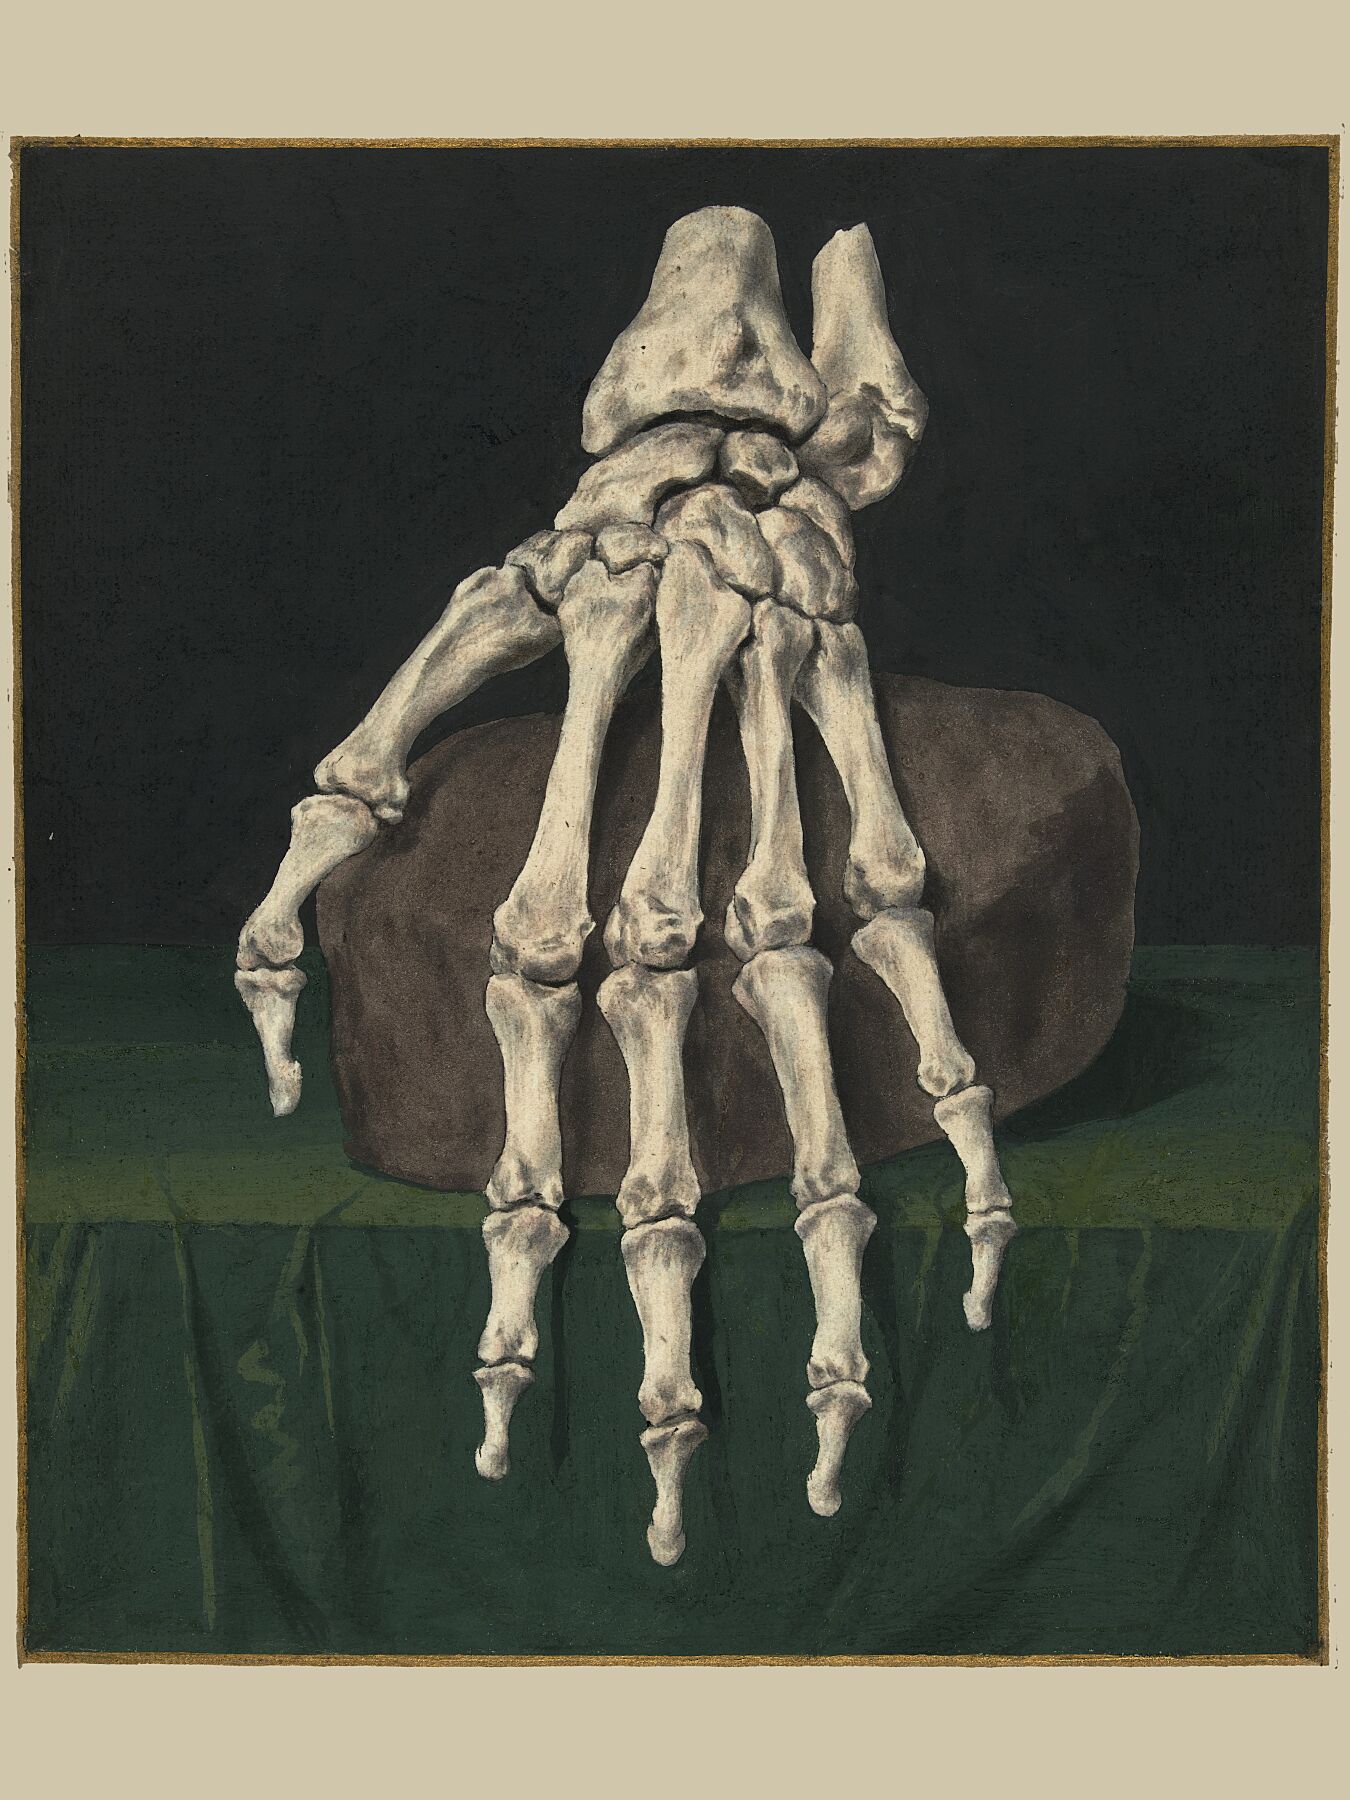 Skeleton of a hand, Jan l'Admiral - c.18th Century